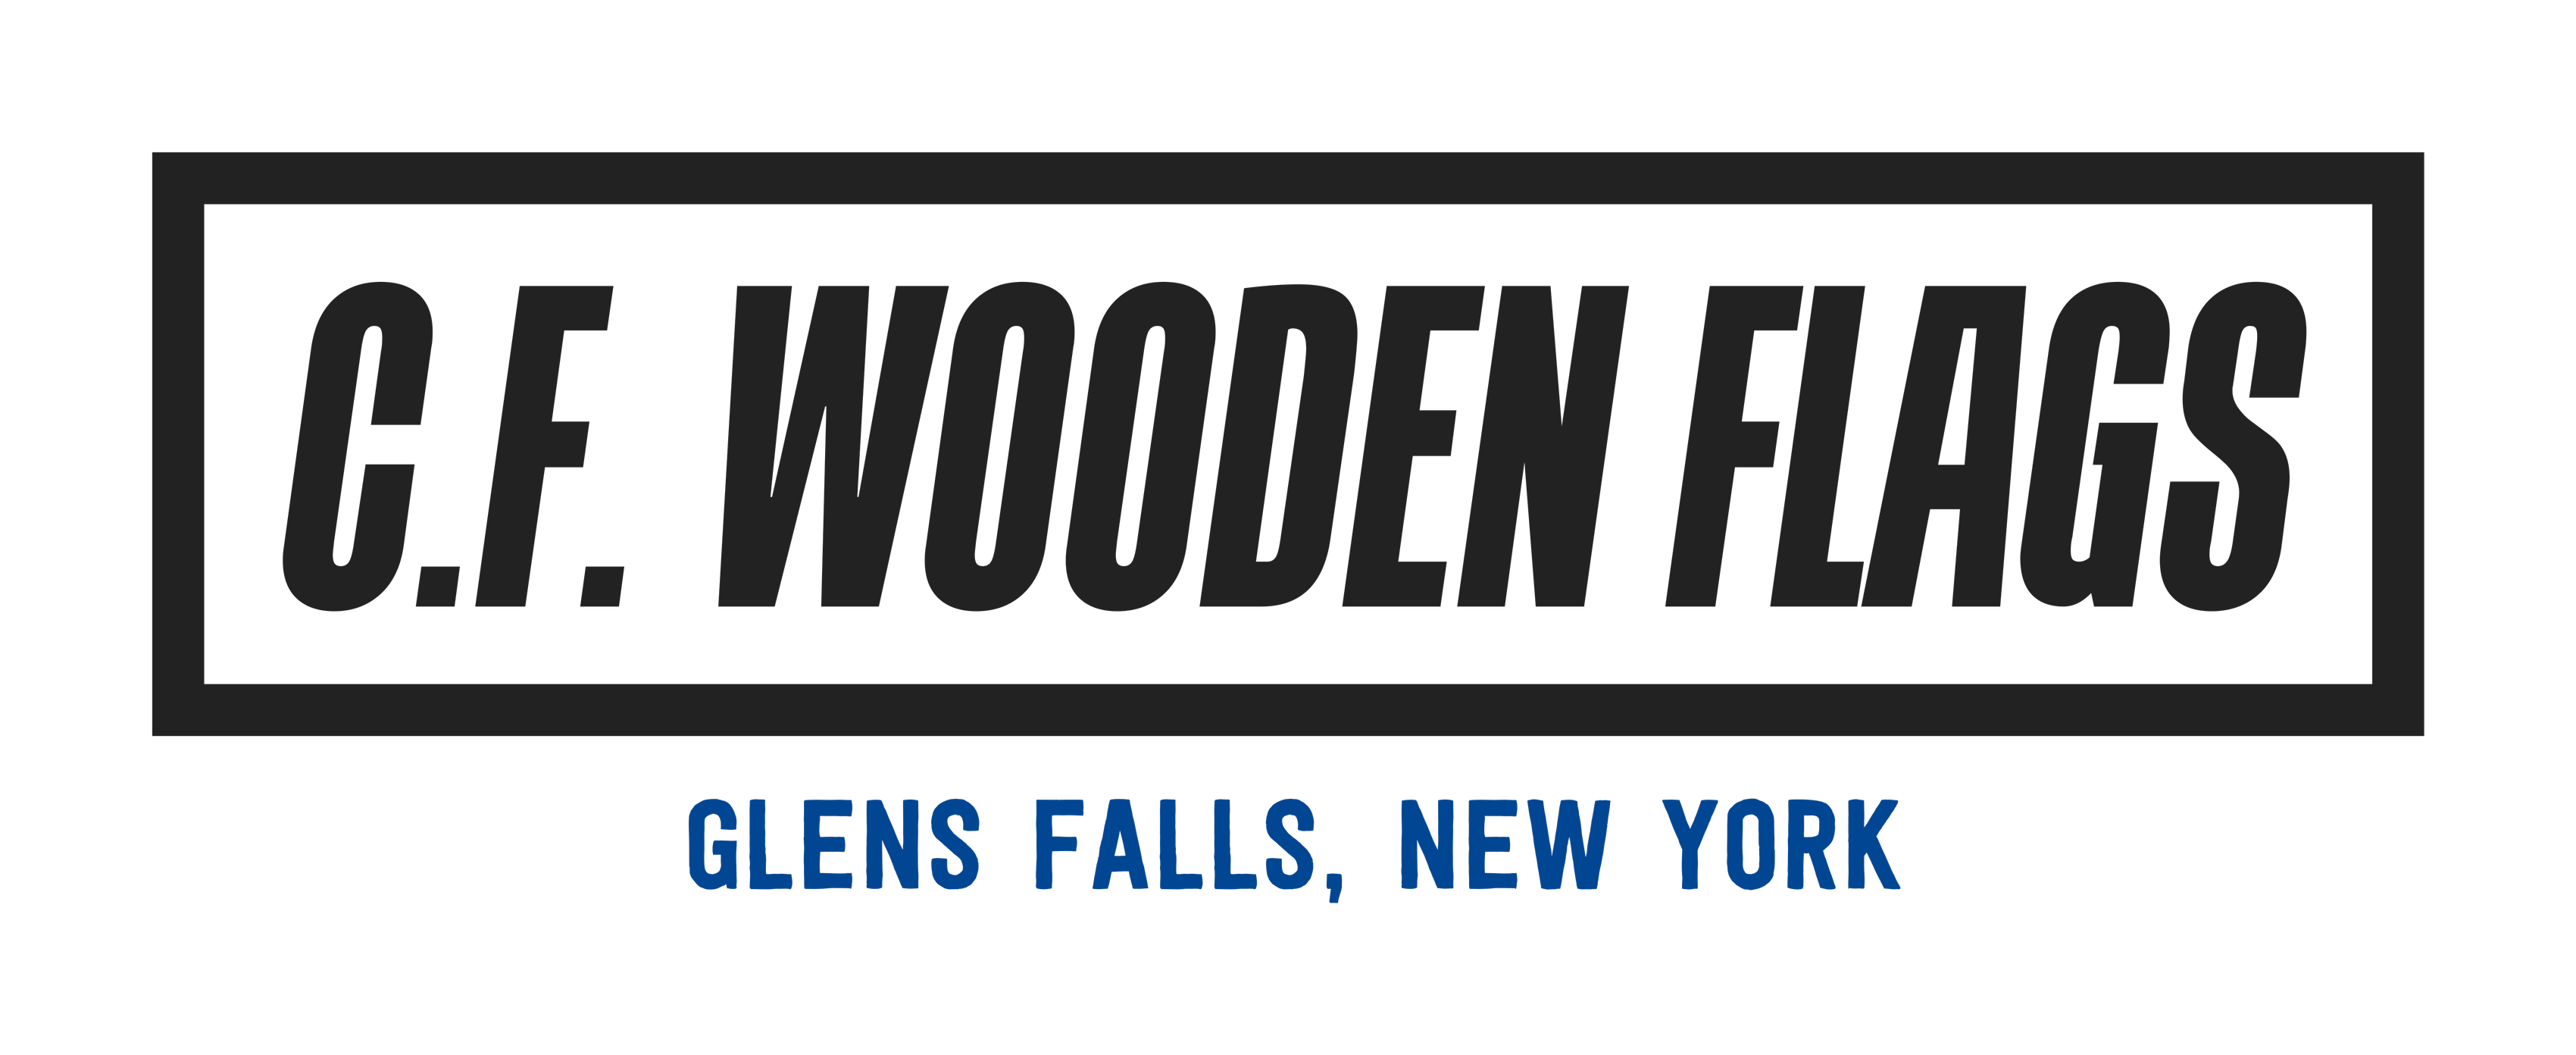 C.F. Wooden Flags